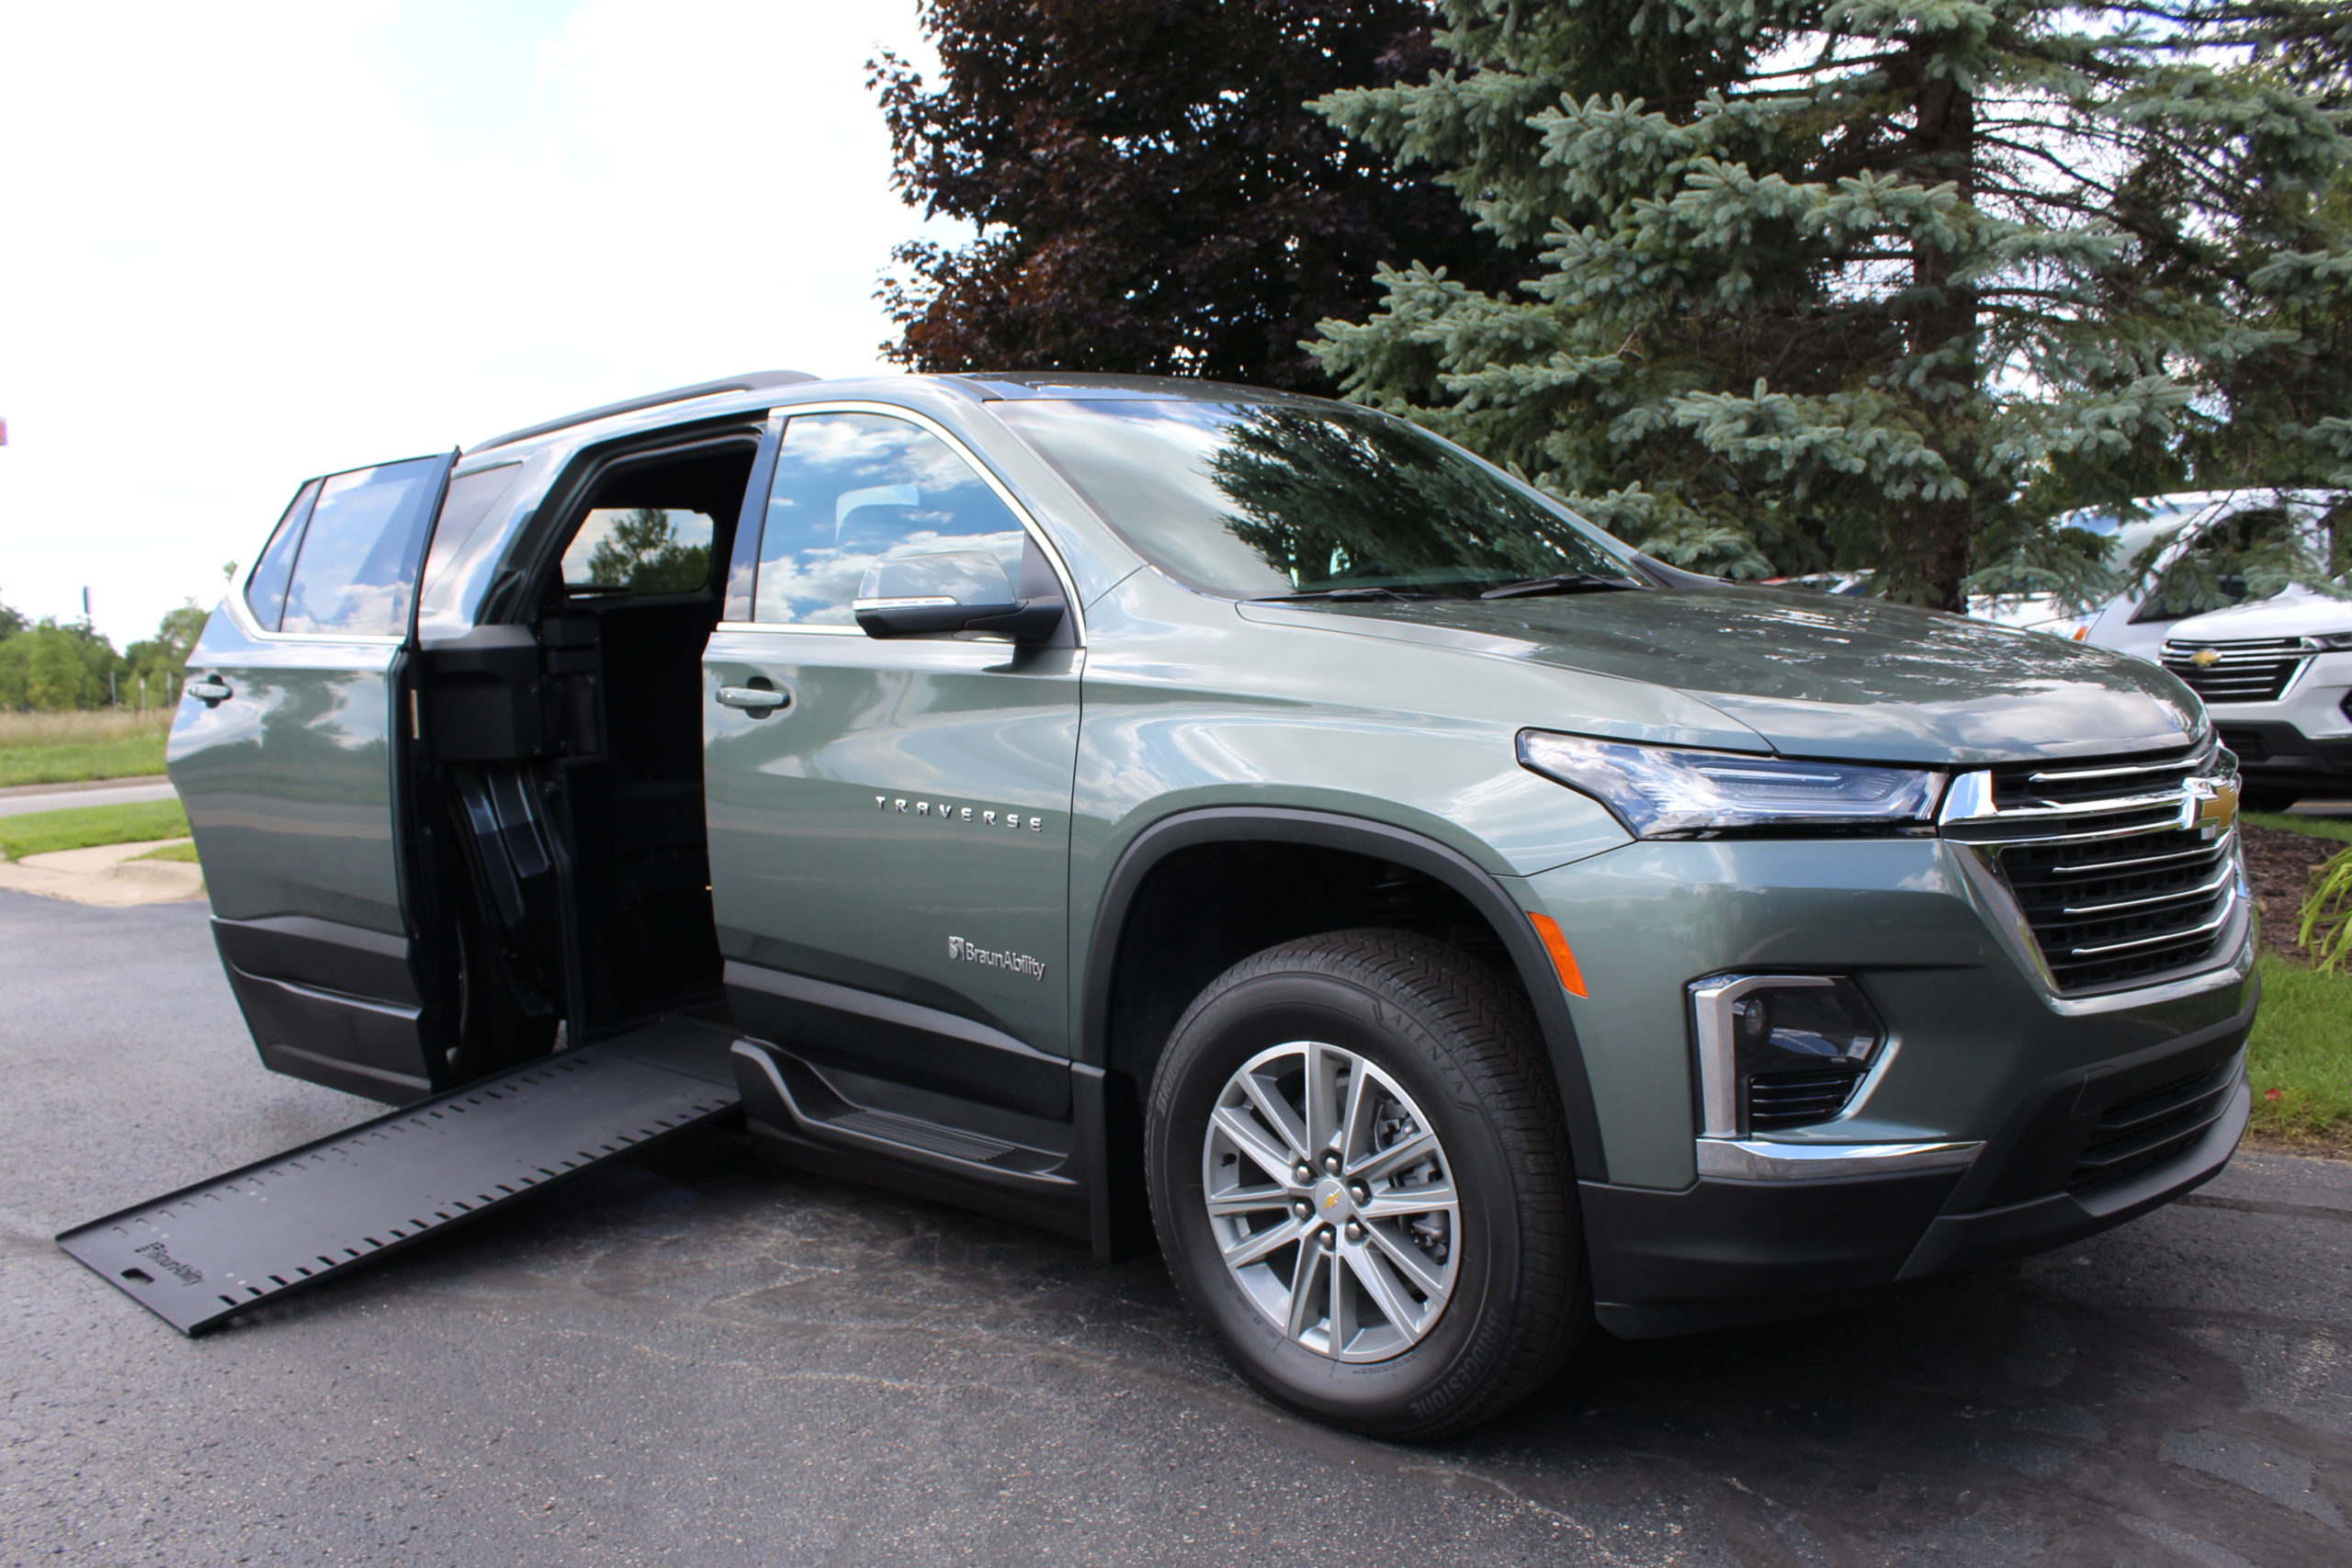 2022 Silver Sage Chevy Traverse 1LT with BraunAbility XI Conversion